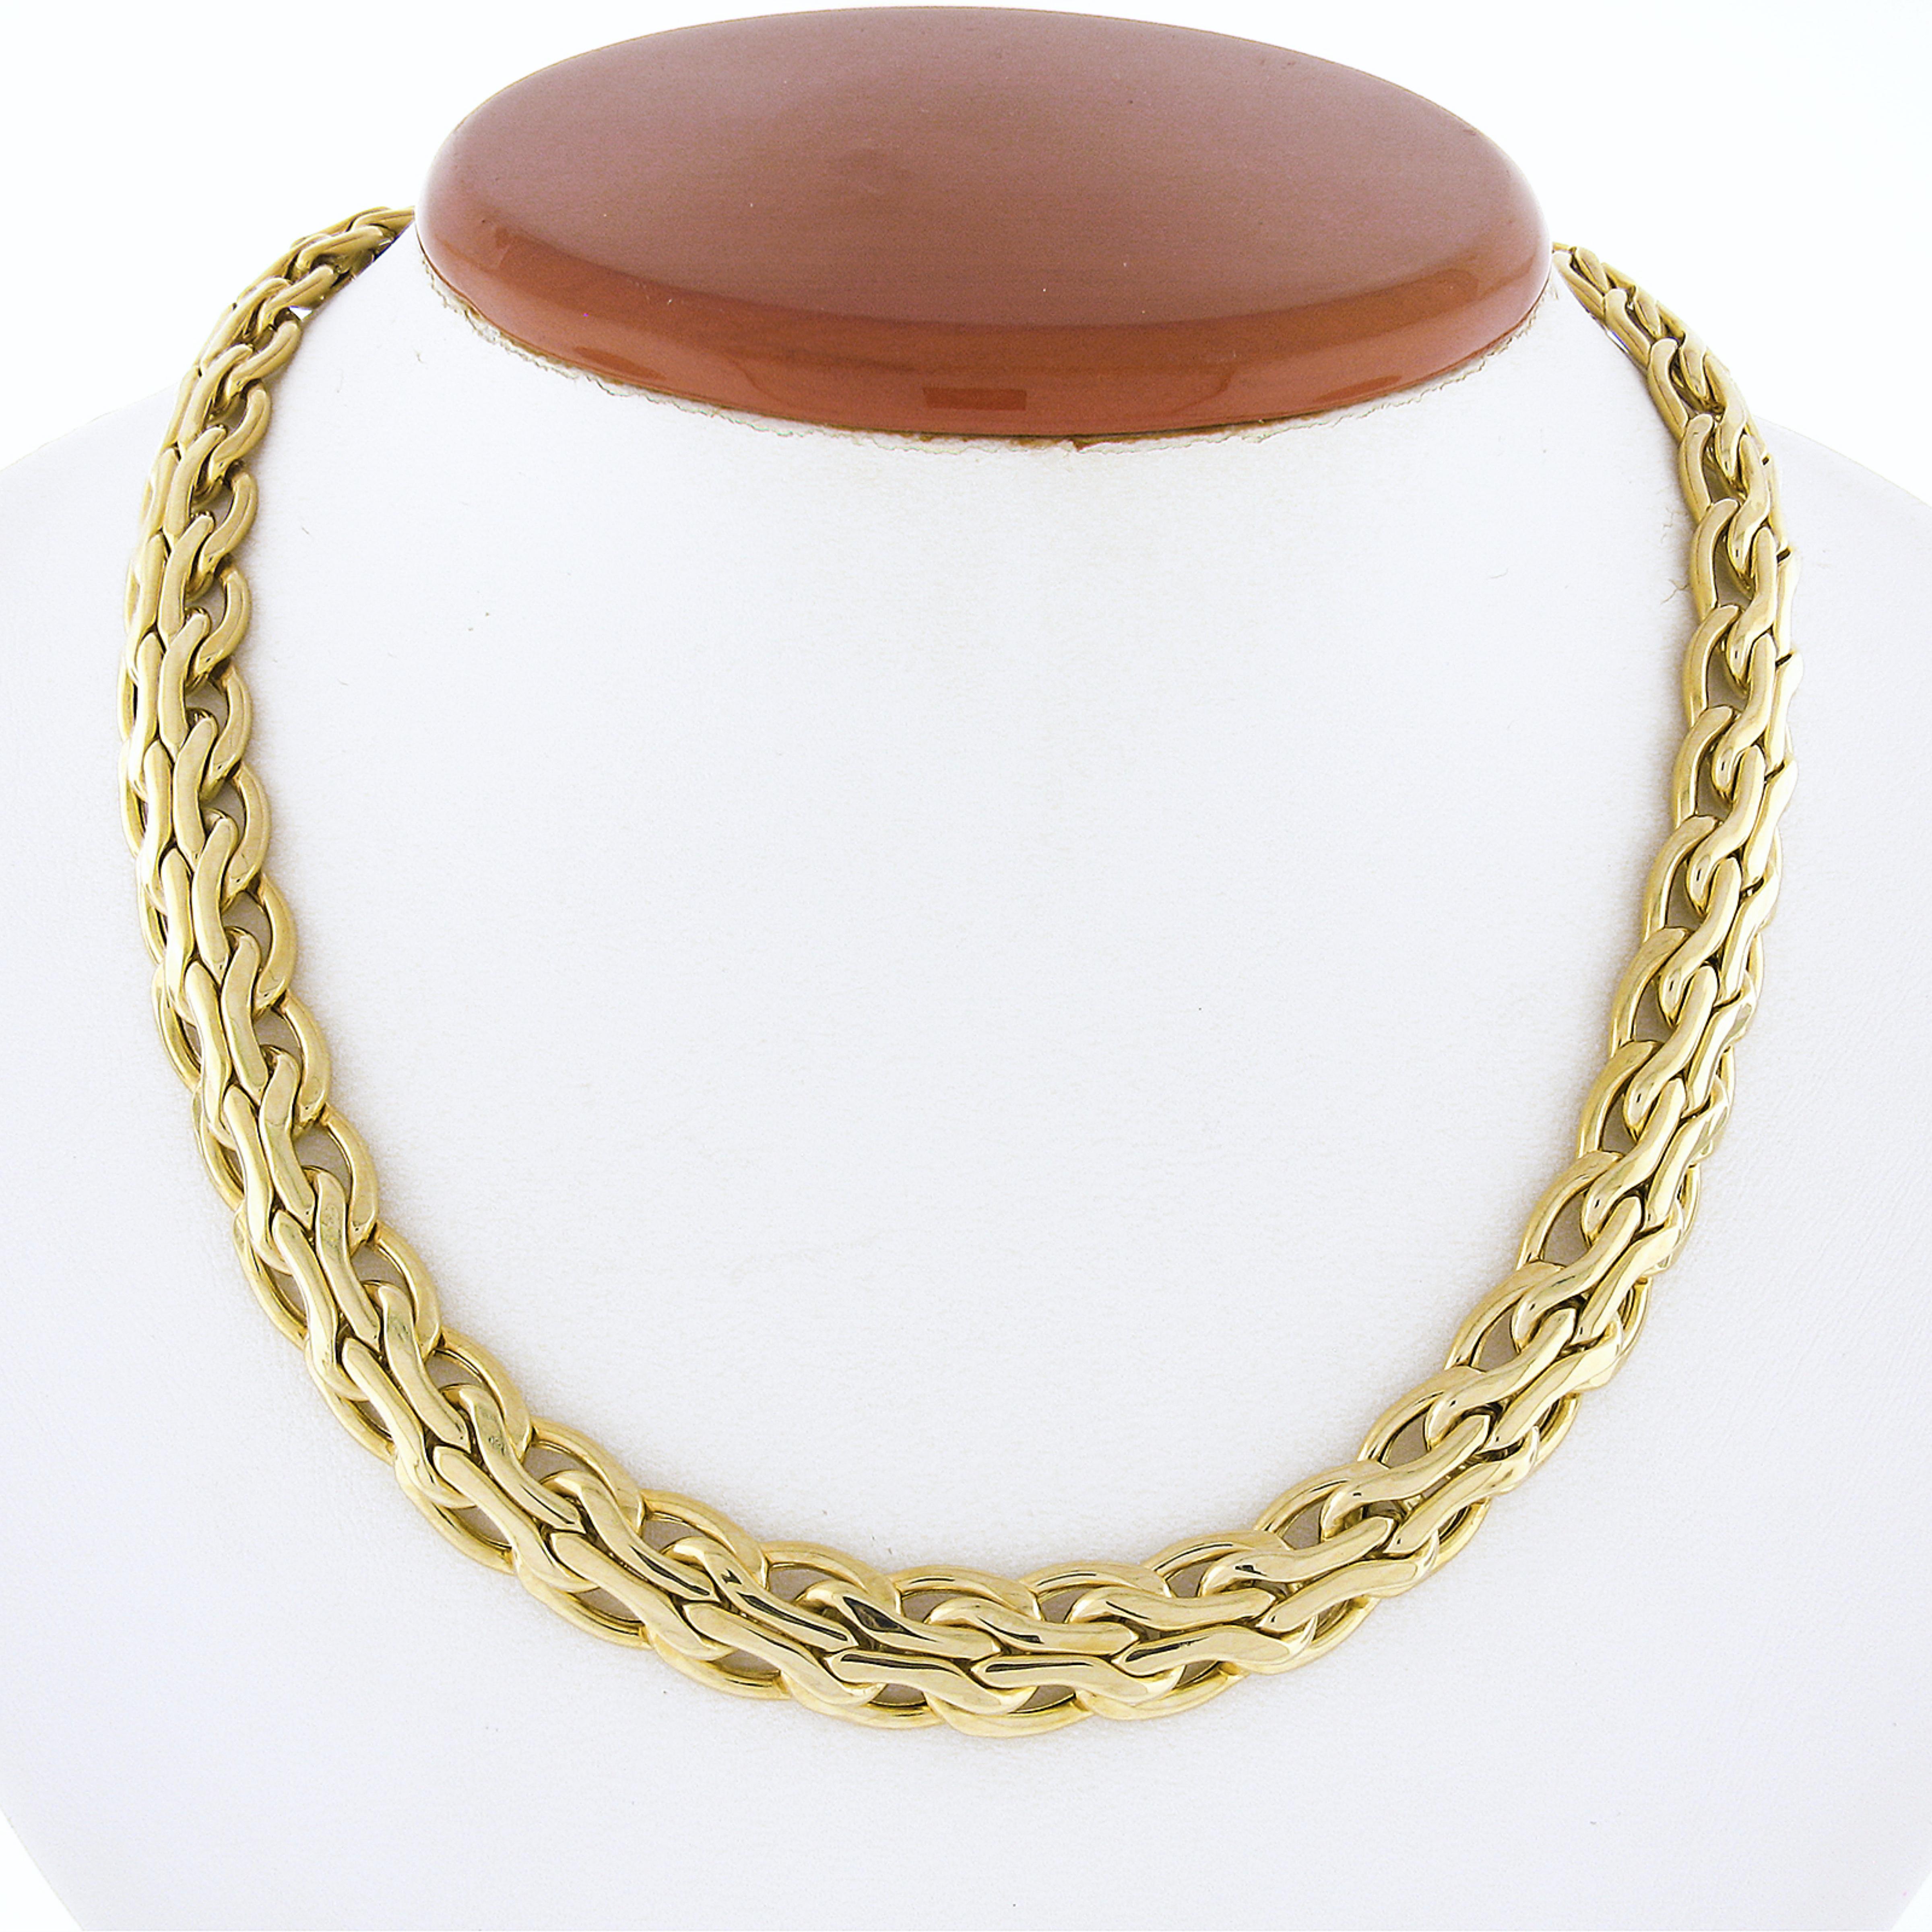 Here we have a very well made collier necklace designed by H.Stern and crafted from solid 14k yellow gold. The necklace features wide puffed Bismark links with wonderful high polished finish throughout and connect seamlessly to give the piece its